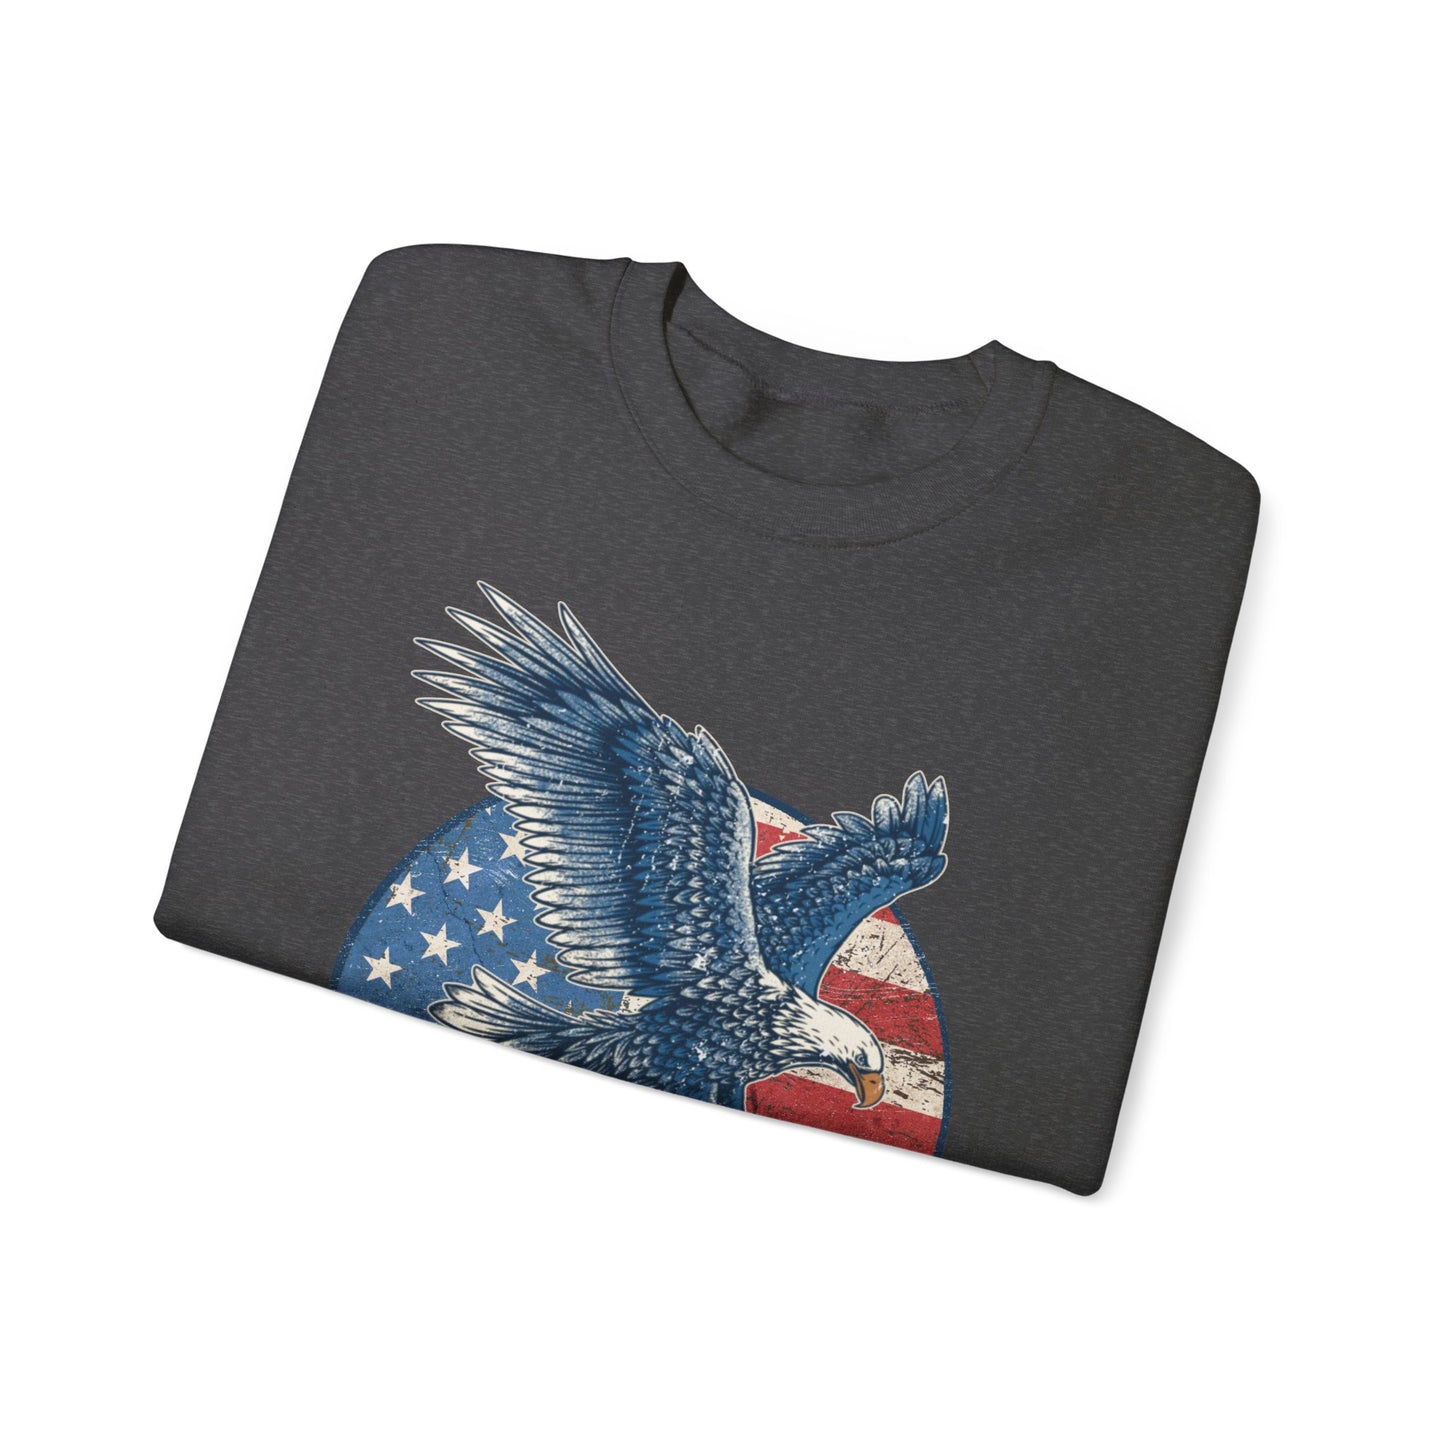 Retro 4th of July 2024 Distressed American Flag Eagle 1776 Made in America Vintage Patriotic America Freedom Fourth of July Independence Day Sweatshirt - Stay Tomorrow Needs You Retro 4th of July 2024 Distressed American Flag Eagle 1776 Made in America Vintage Patriotic America Freedom Fourth of July Independence Day Sweatshirt